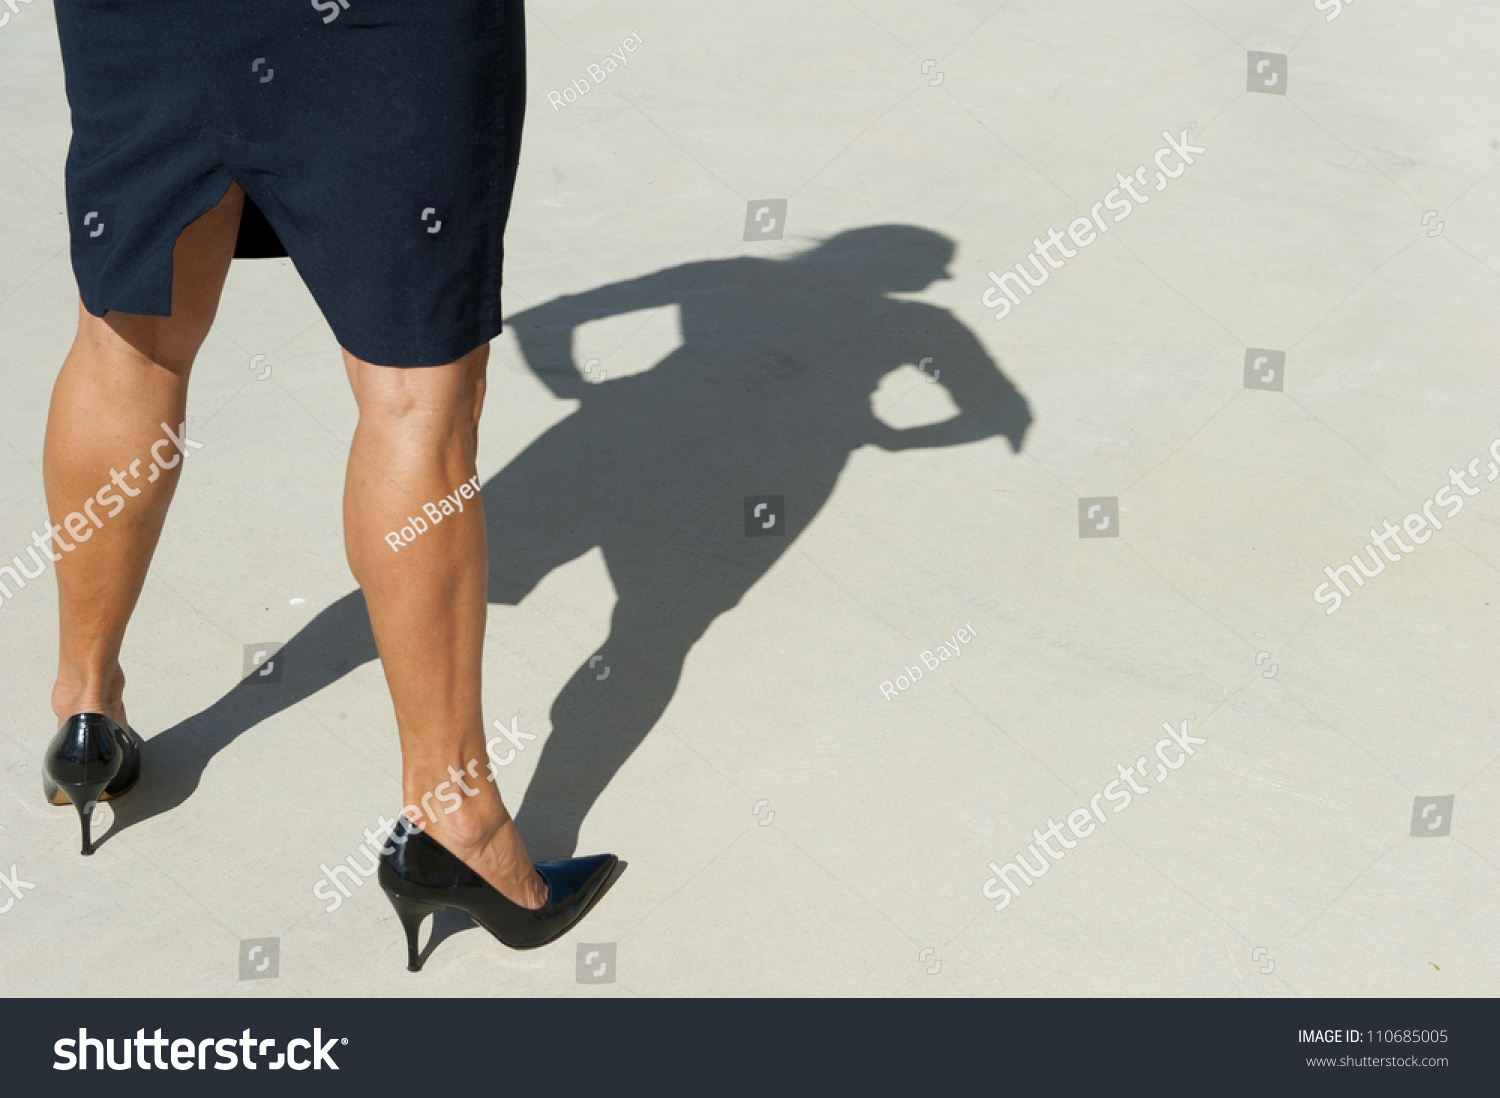 Sexy Legs Isolated Shadow On Concrete Stock Photo 110685005 - Shutterstock